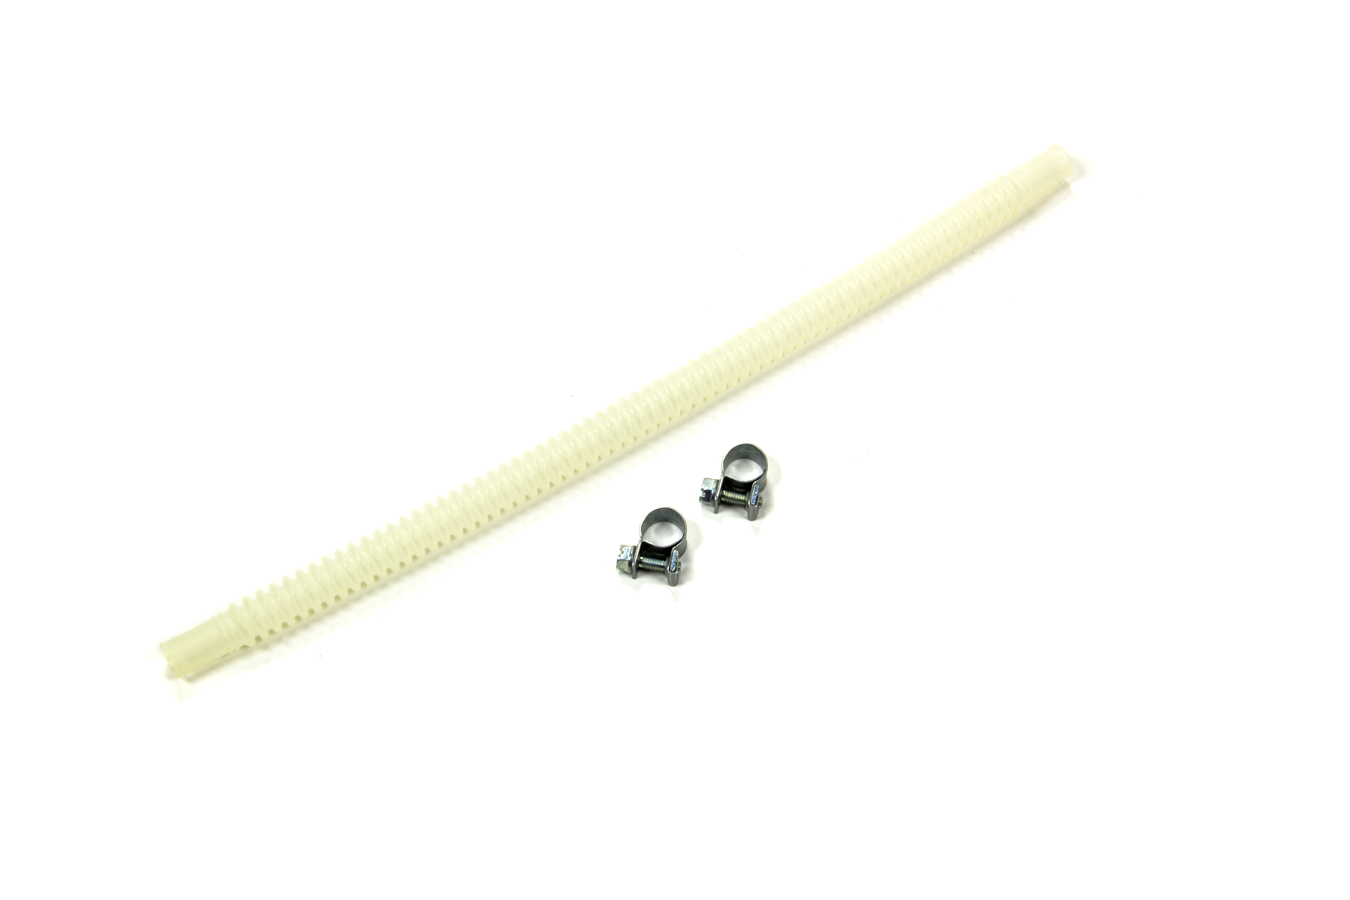 ATL Fuel Cells CFD-401 Fuel Line, Corrugated, 5/16 in, 1 ft, Plastic, White, Each